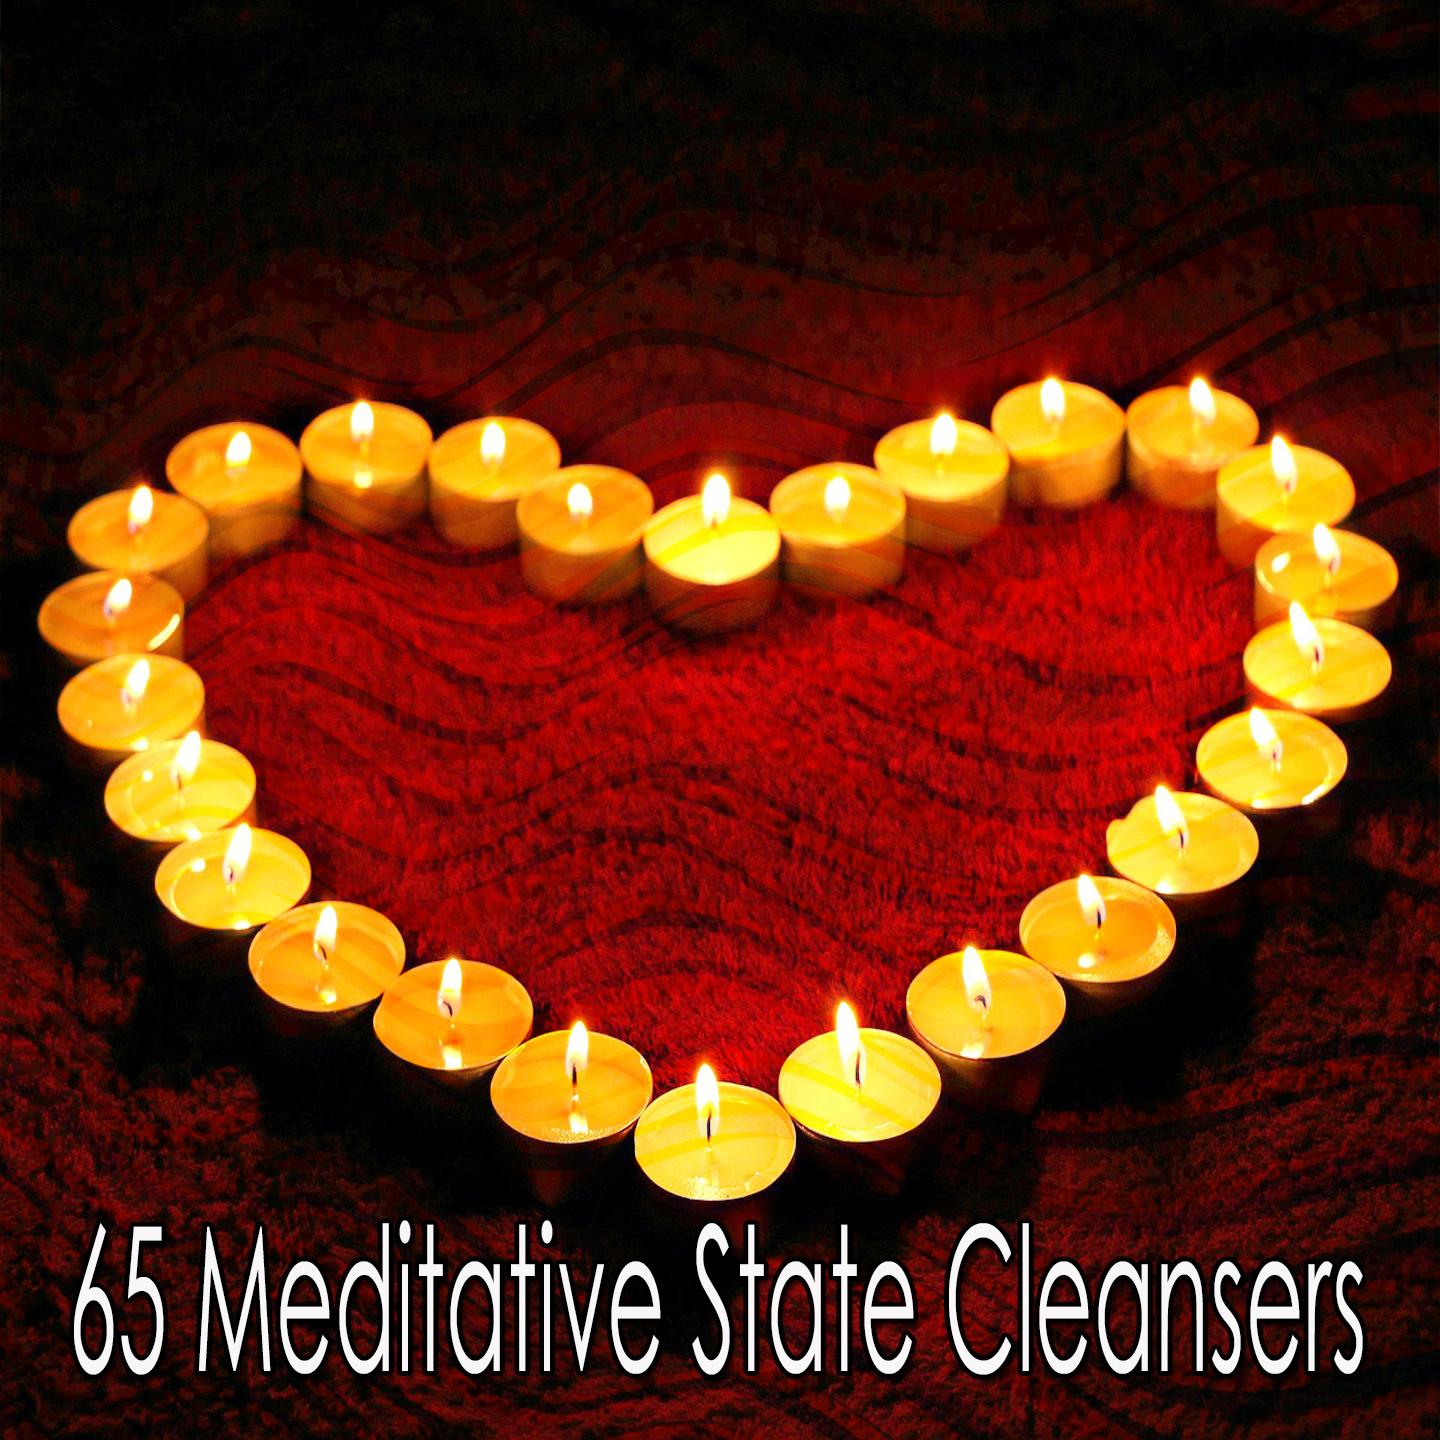 65 Meditative State Cleansers